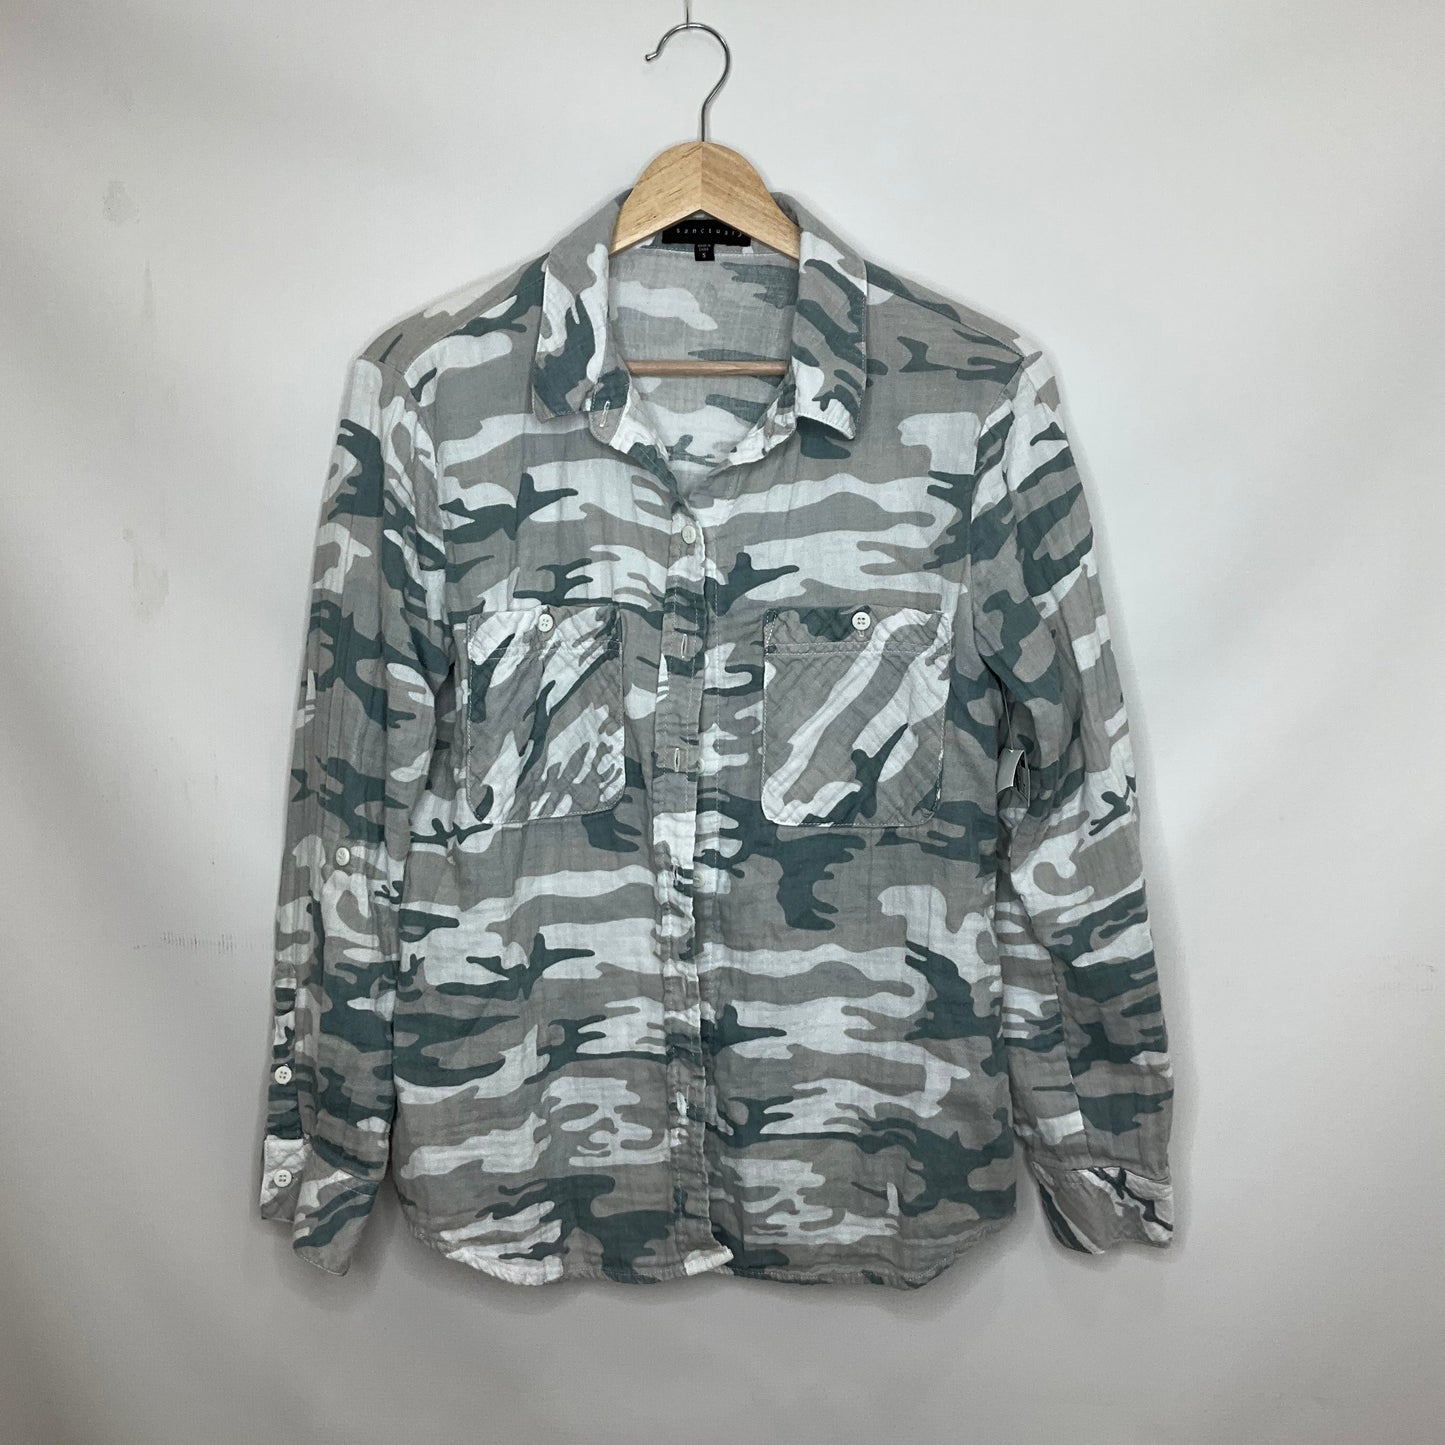 Camouflage Print Top Long Sleeve Sanctuary, Size S